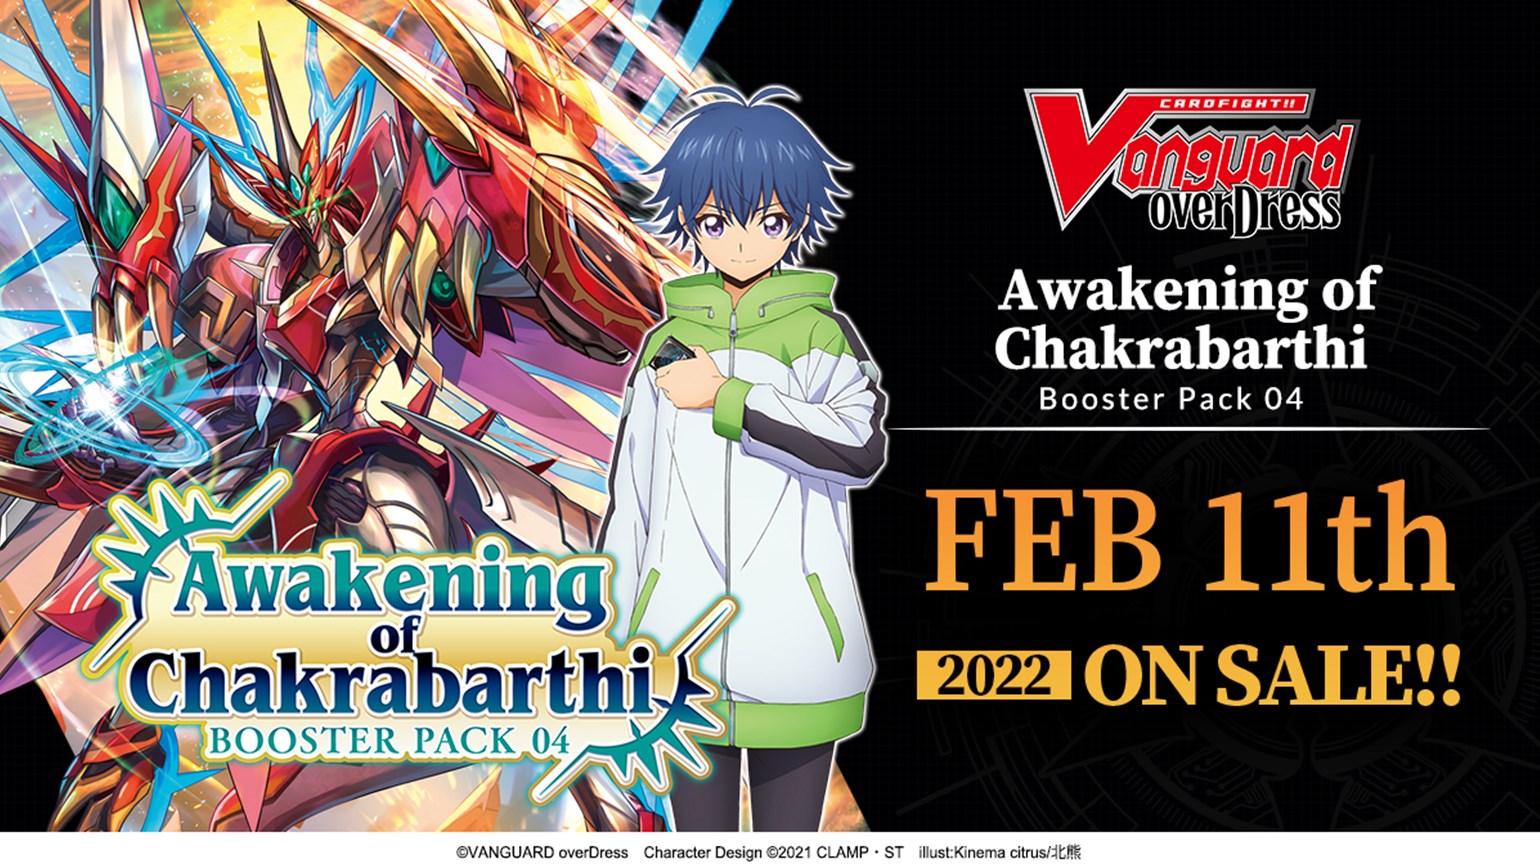 New English Edition overDress Booster Pack 04: Awakening of Chakrabarthi, Coming to Stores on February 11th!